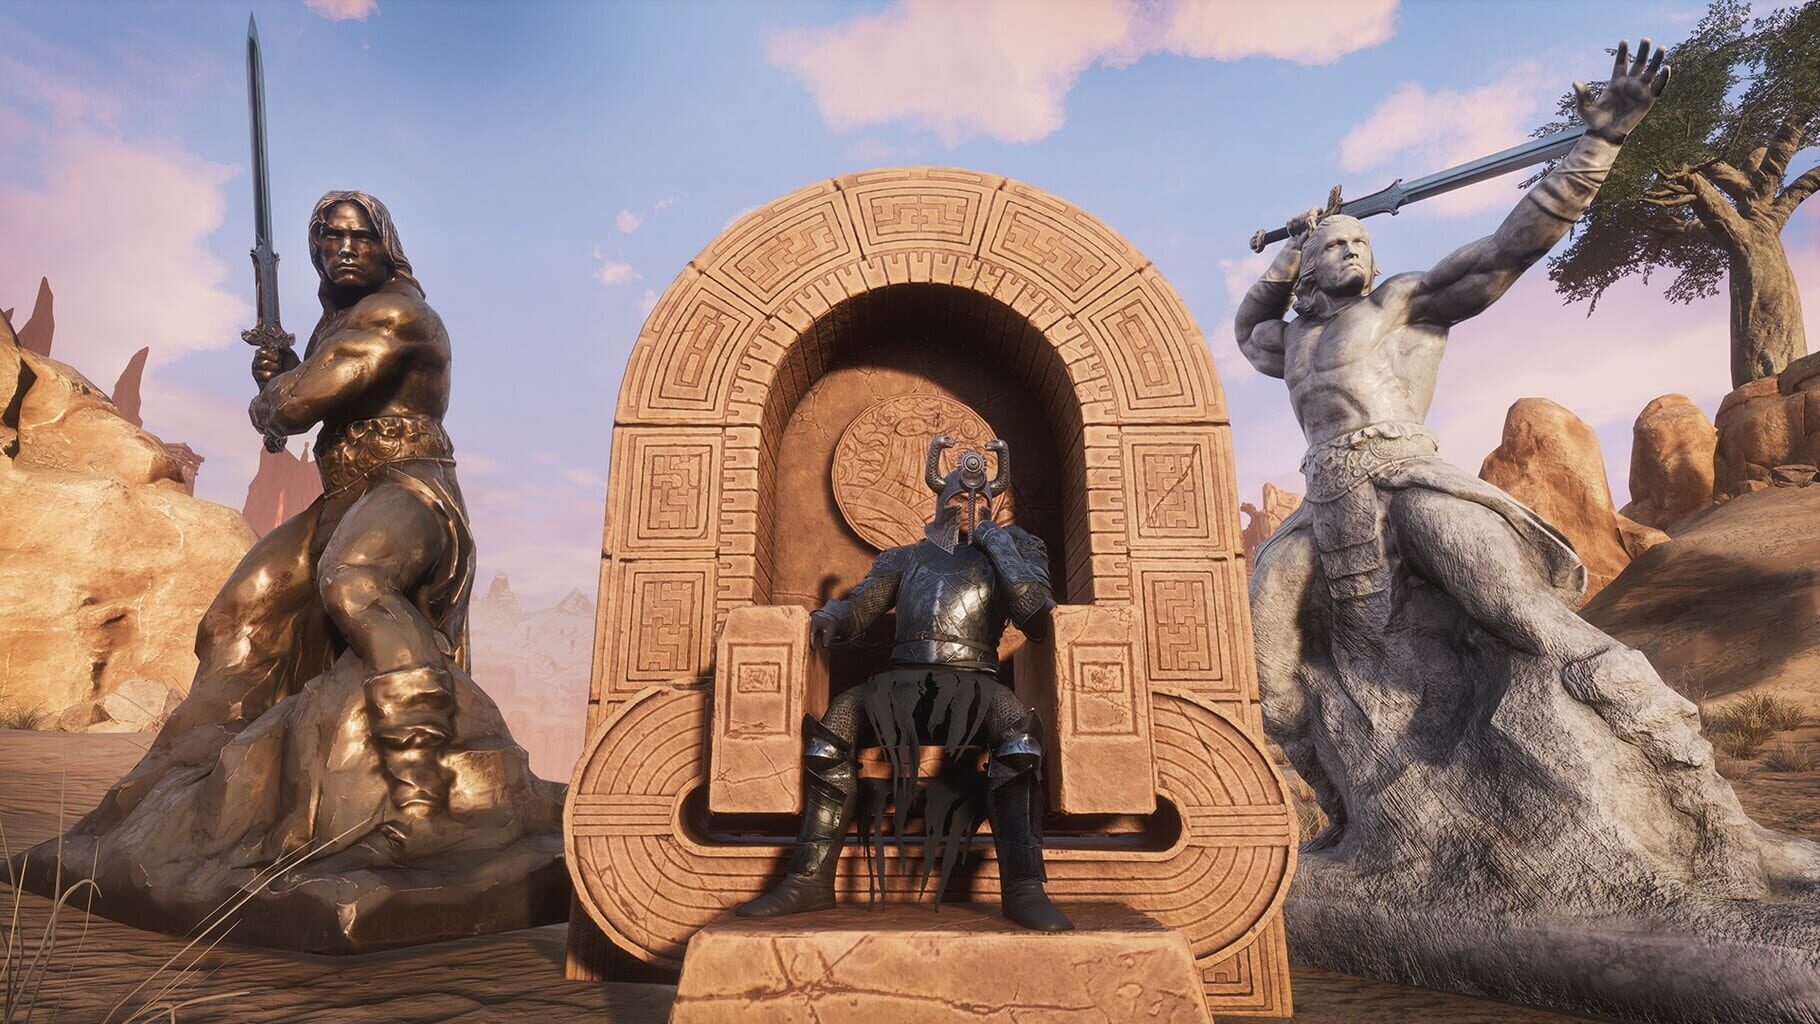 Conan Exiles: The Riddle of Steel Image